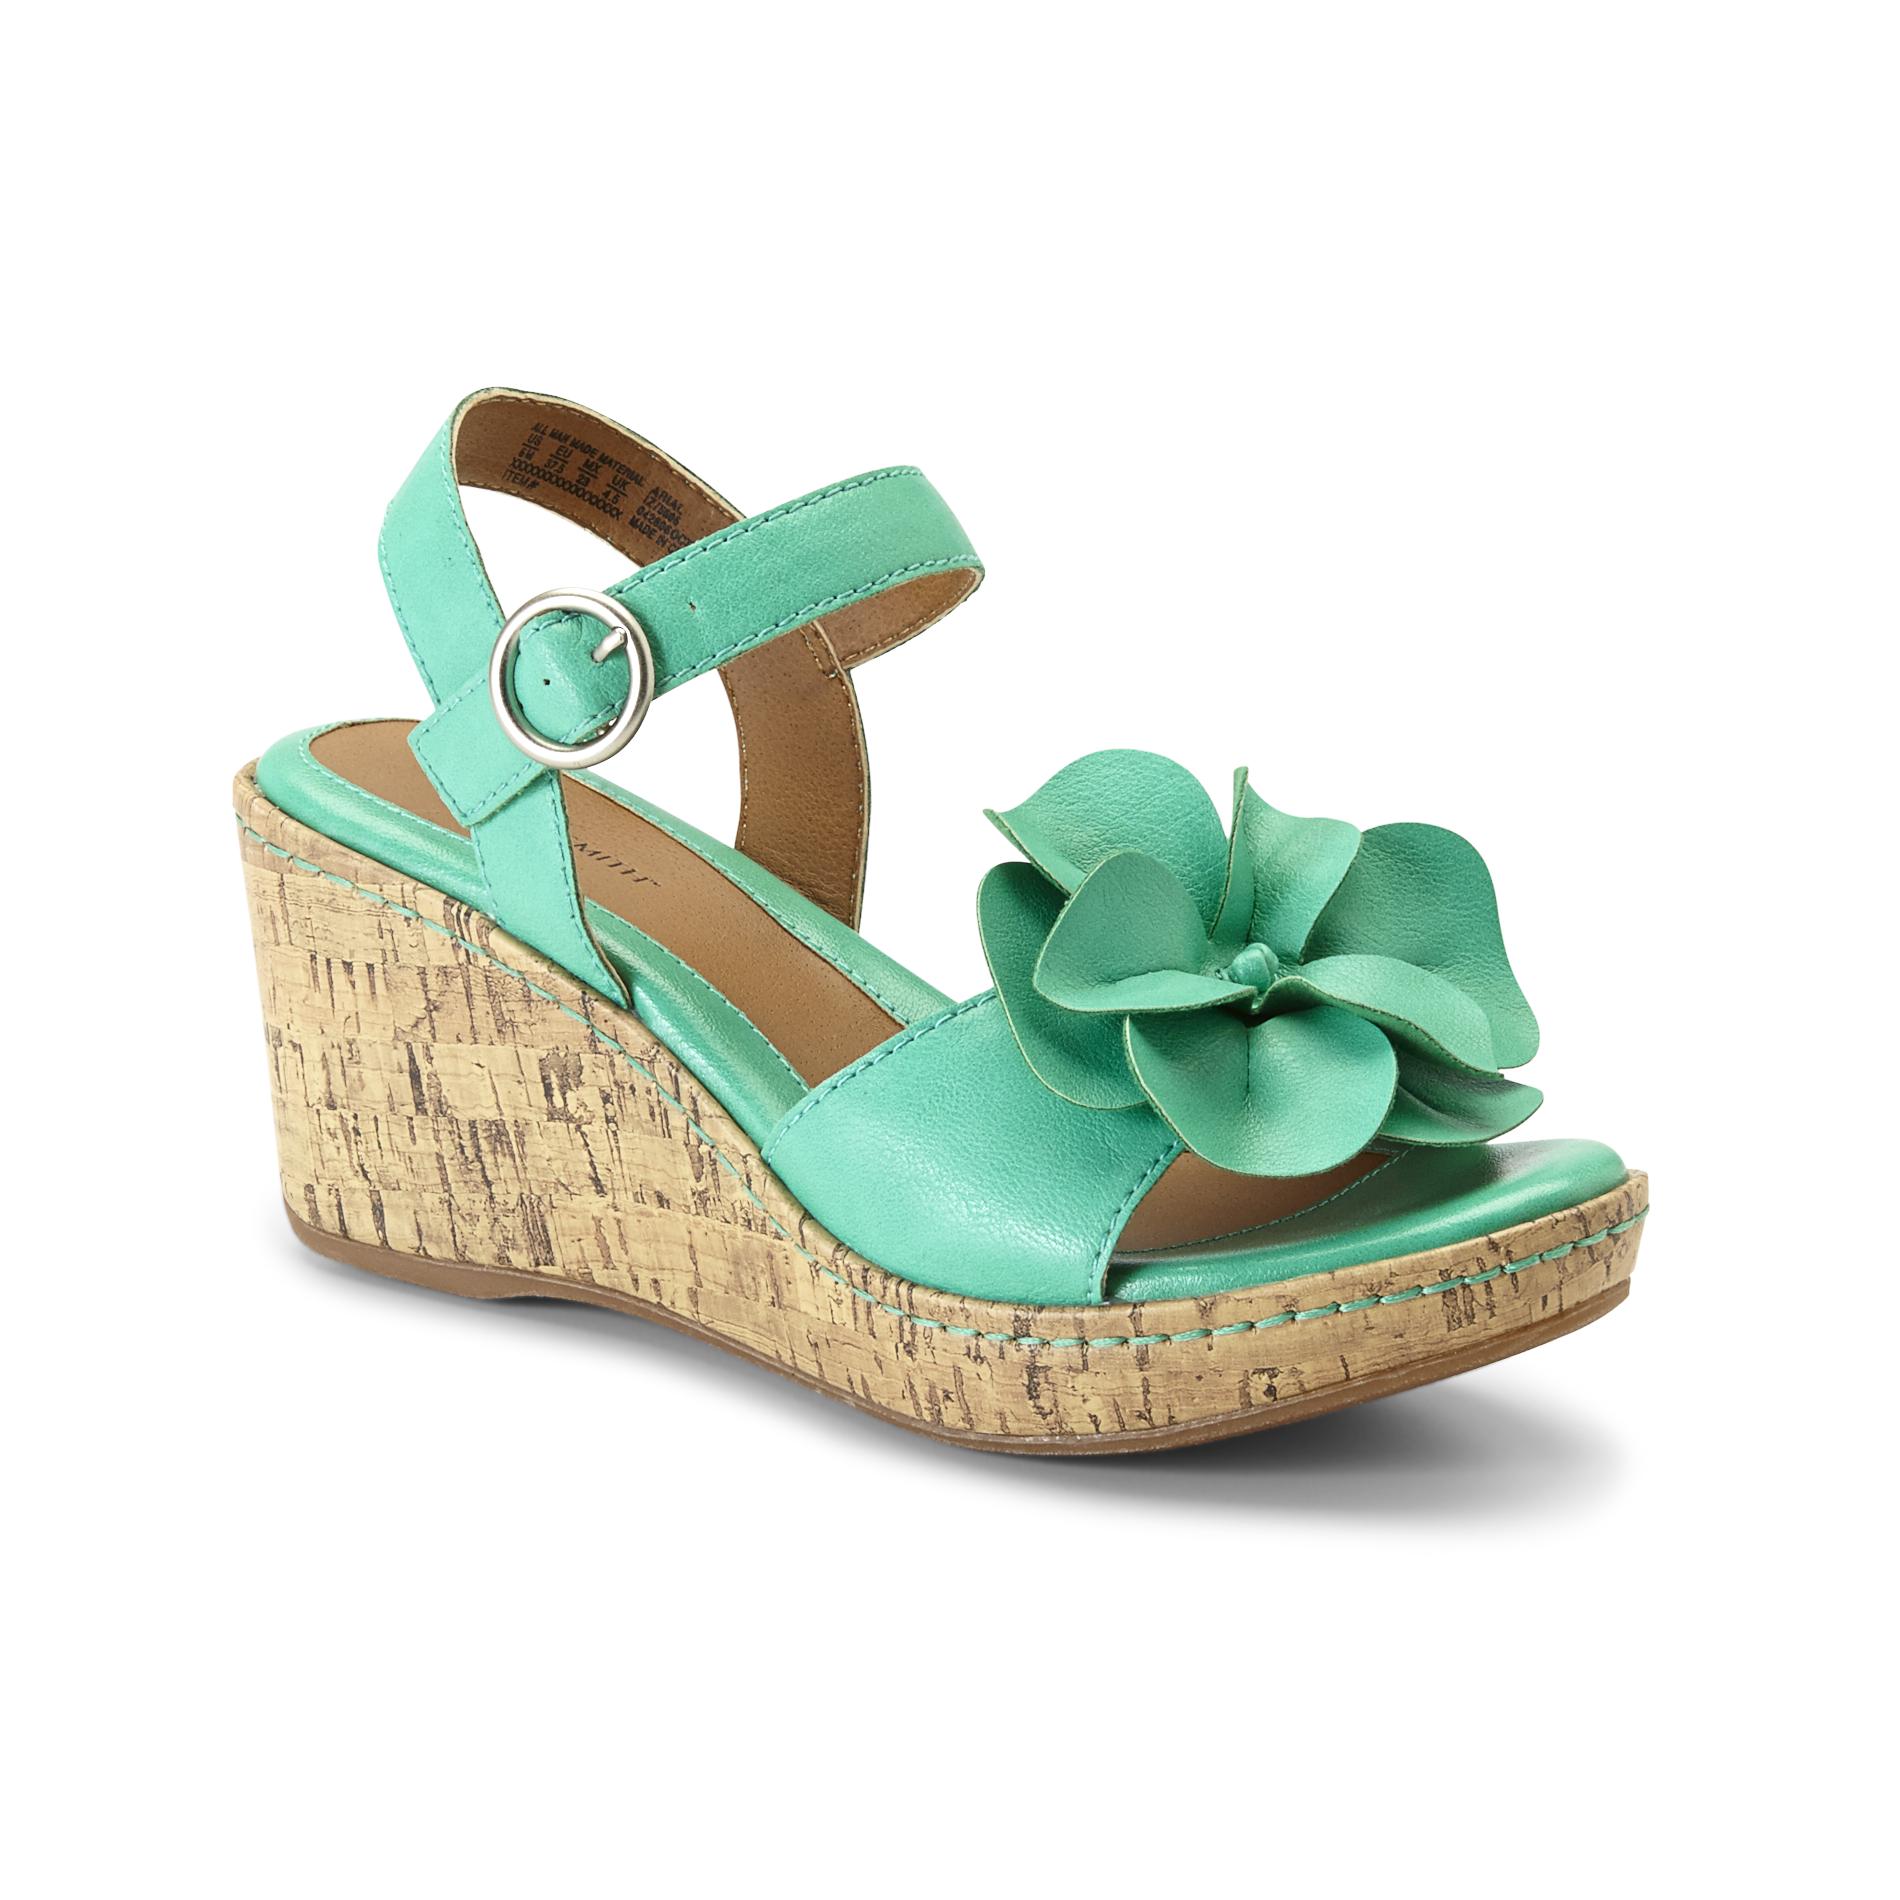 Jaclyn Smith Women's Dress Sandal Arial - Turquoise Wide-Strap Wedge